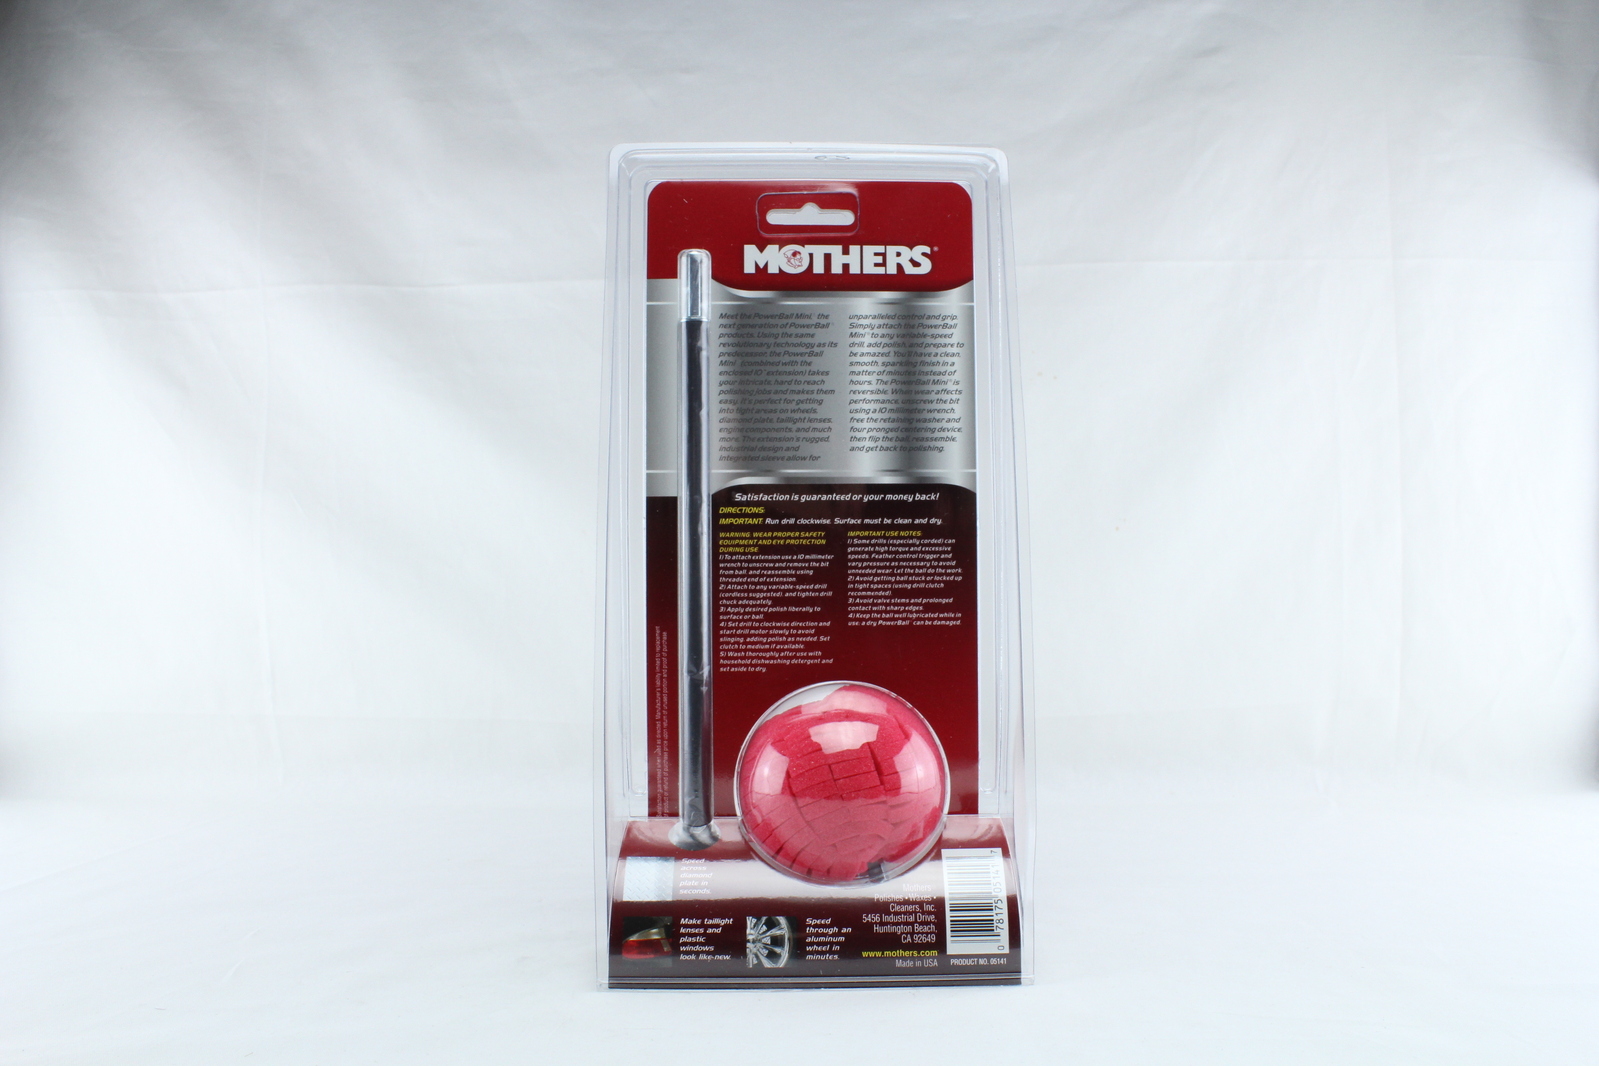 Mothers 05141 PowerBall Mini Polisher with 10 Extension